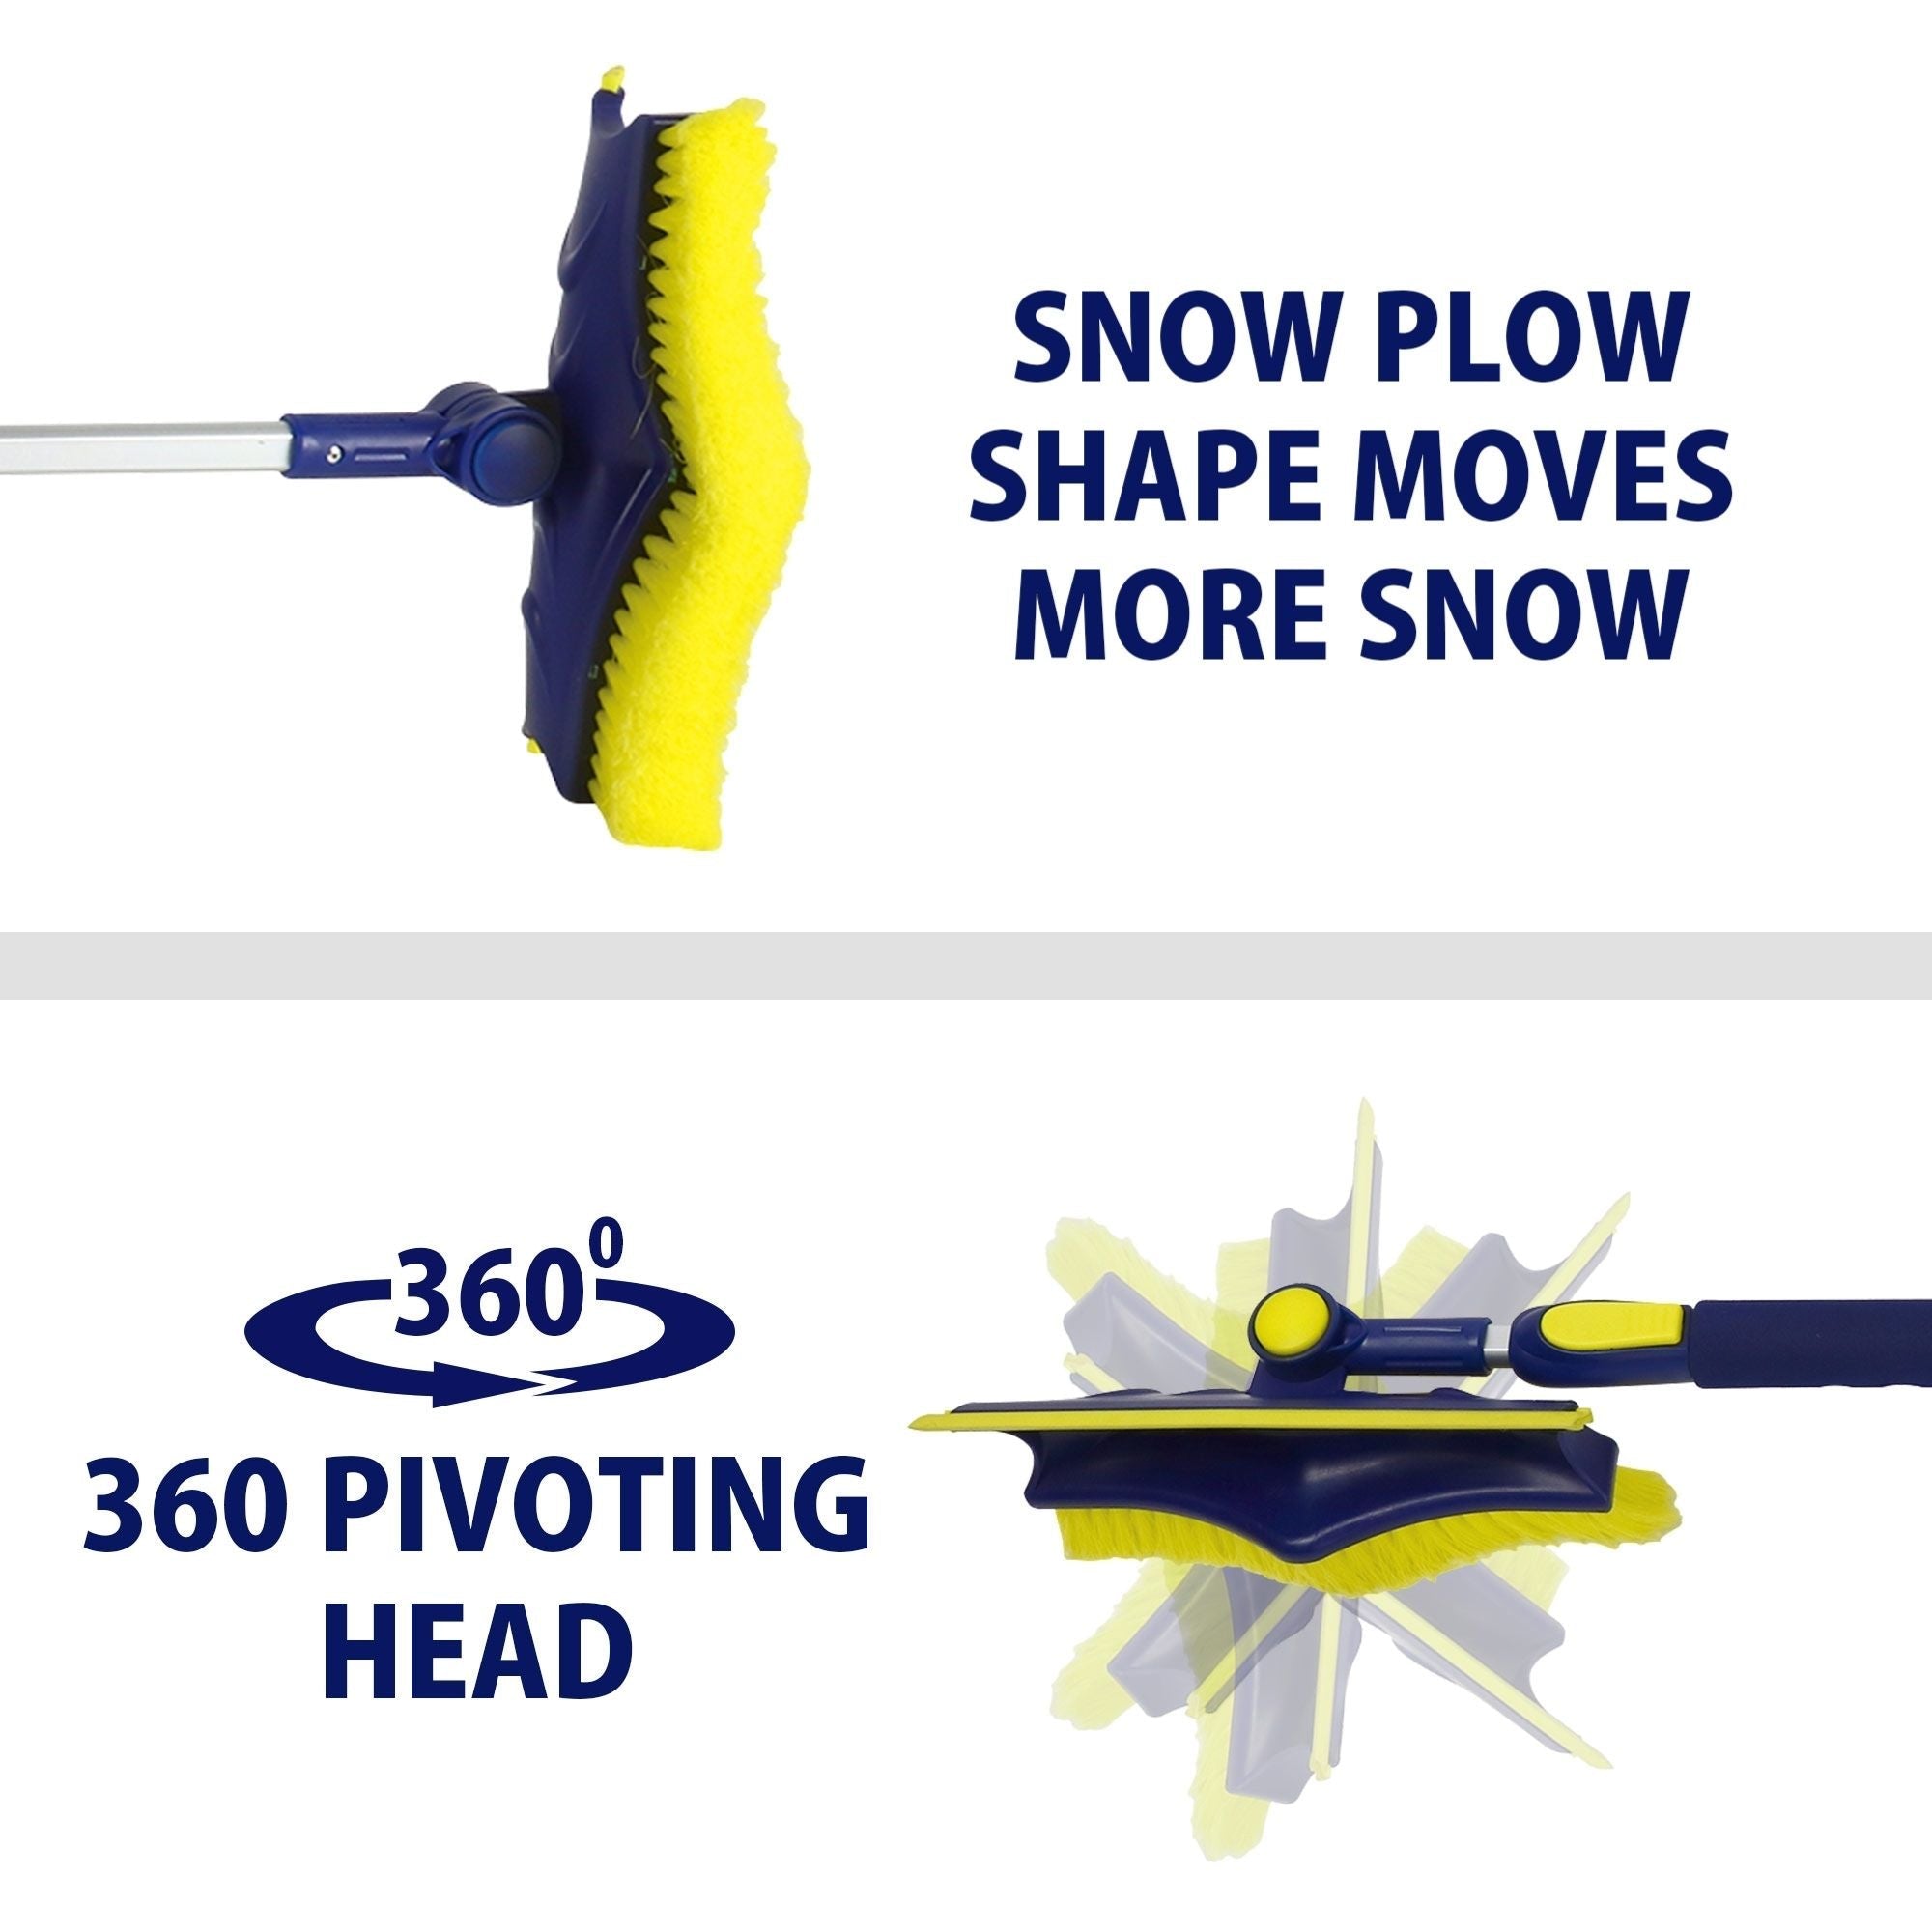 Top half shows a closeup product shot of the brush head from the bottom on a white background with text to the right reading, "Snow plow shape moves more snow." Bottom half shows an enhanced image of the brush head in 8 pre-set positions with text and icon to the left reading, "360 pivoting head"